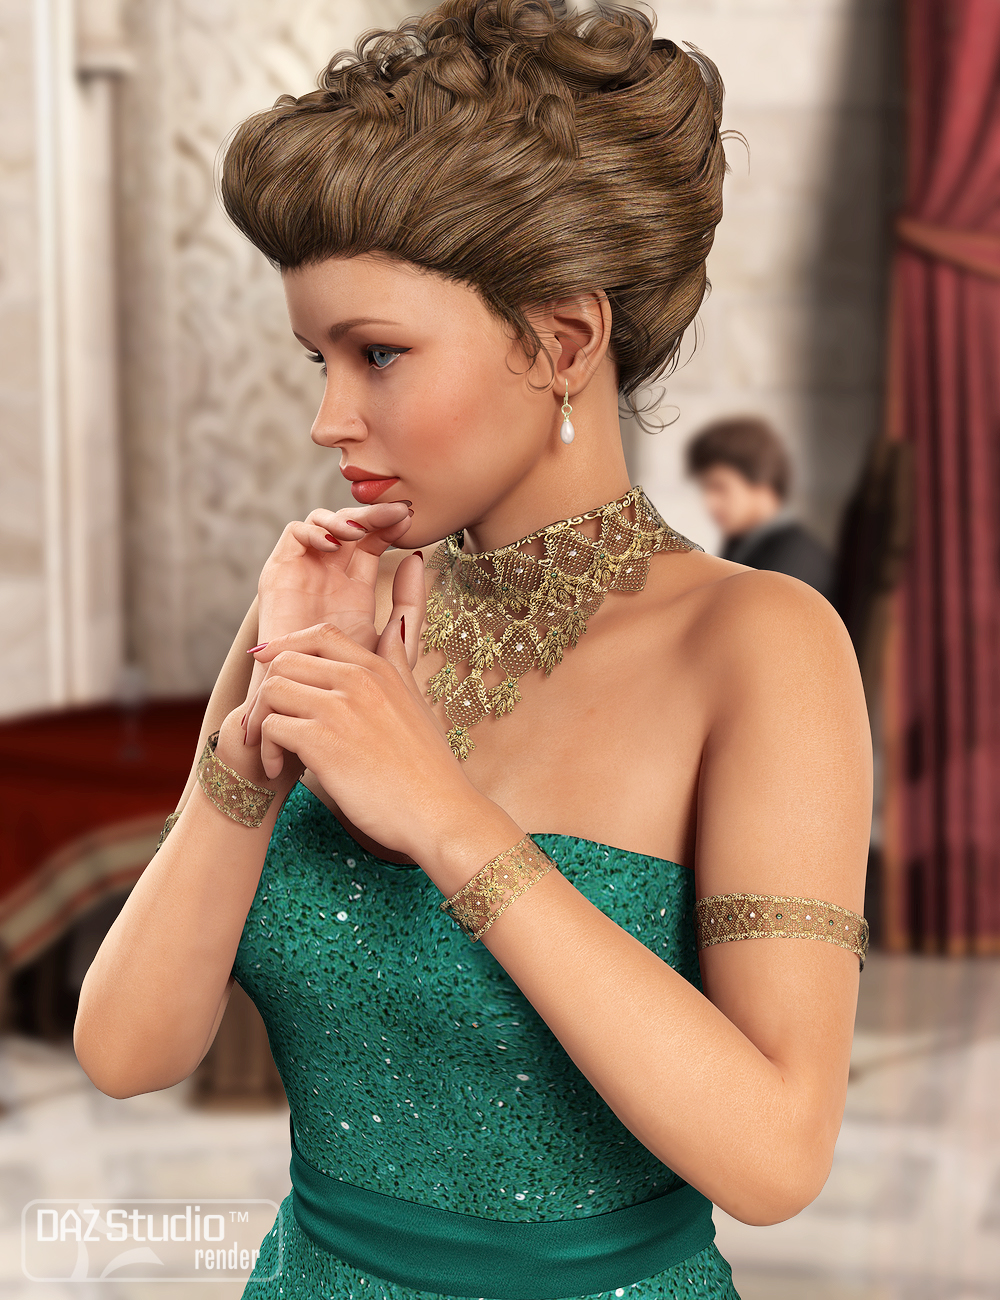 Glitter Fantasy for the Fantasy Collar by: LaurieS, 3D Models by Daz 3D